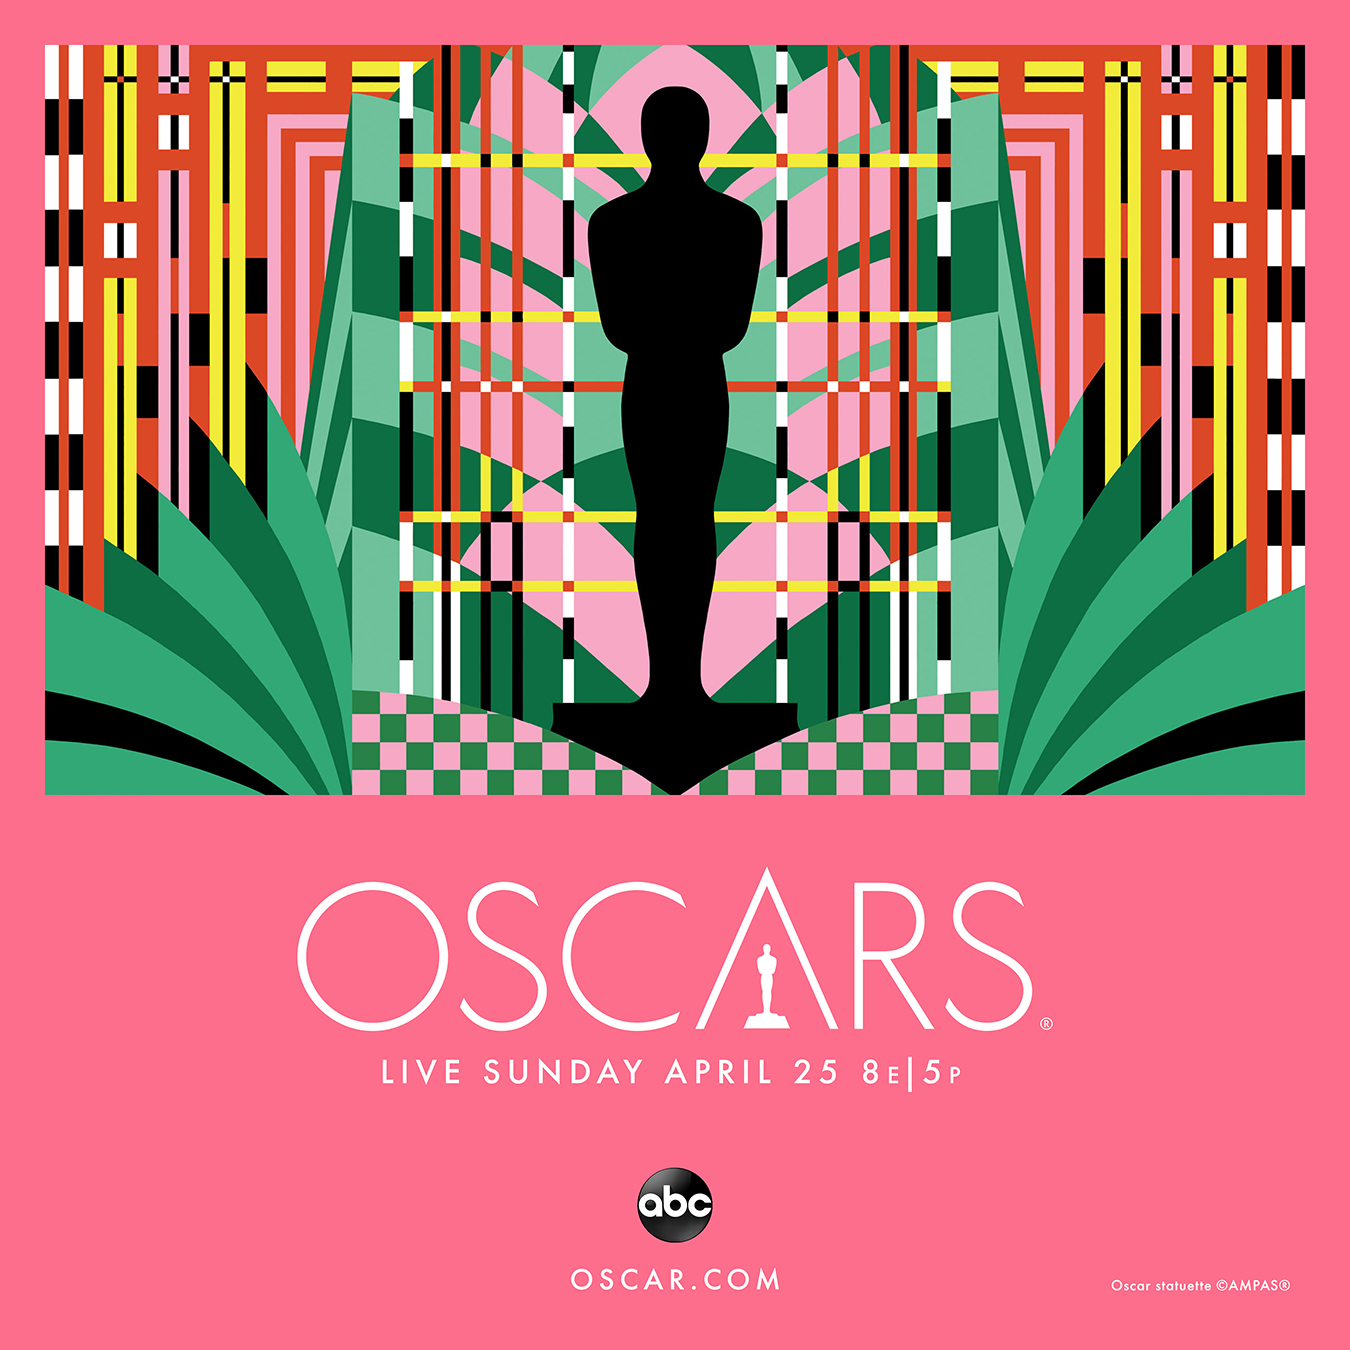 93rd Oscars’ campaign art by Michelle Robinson